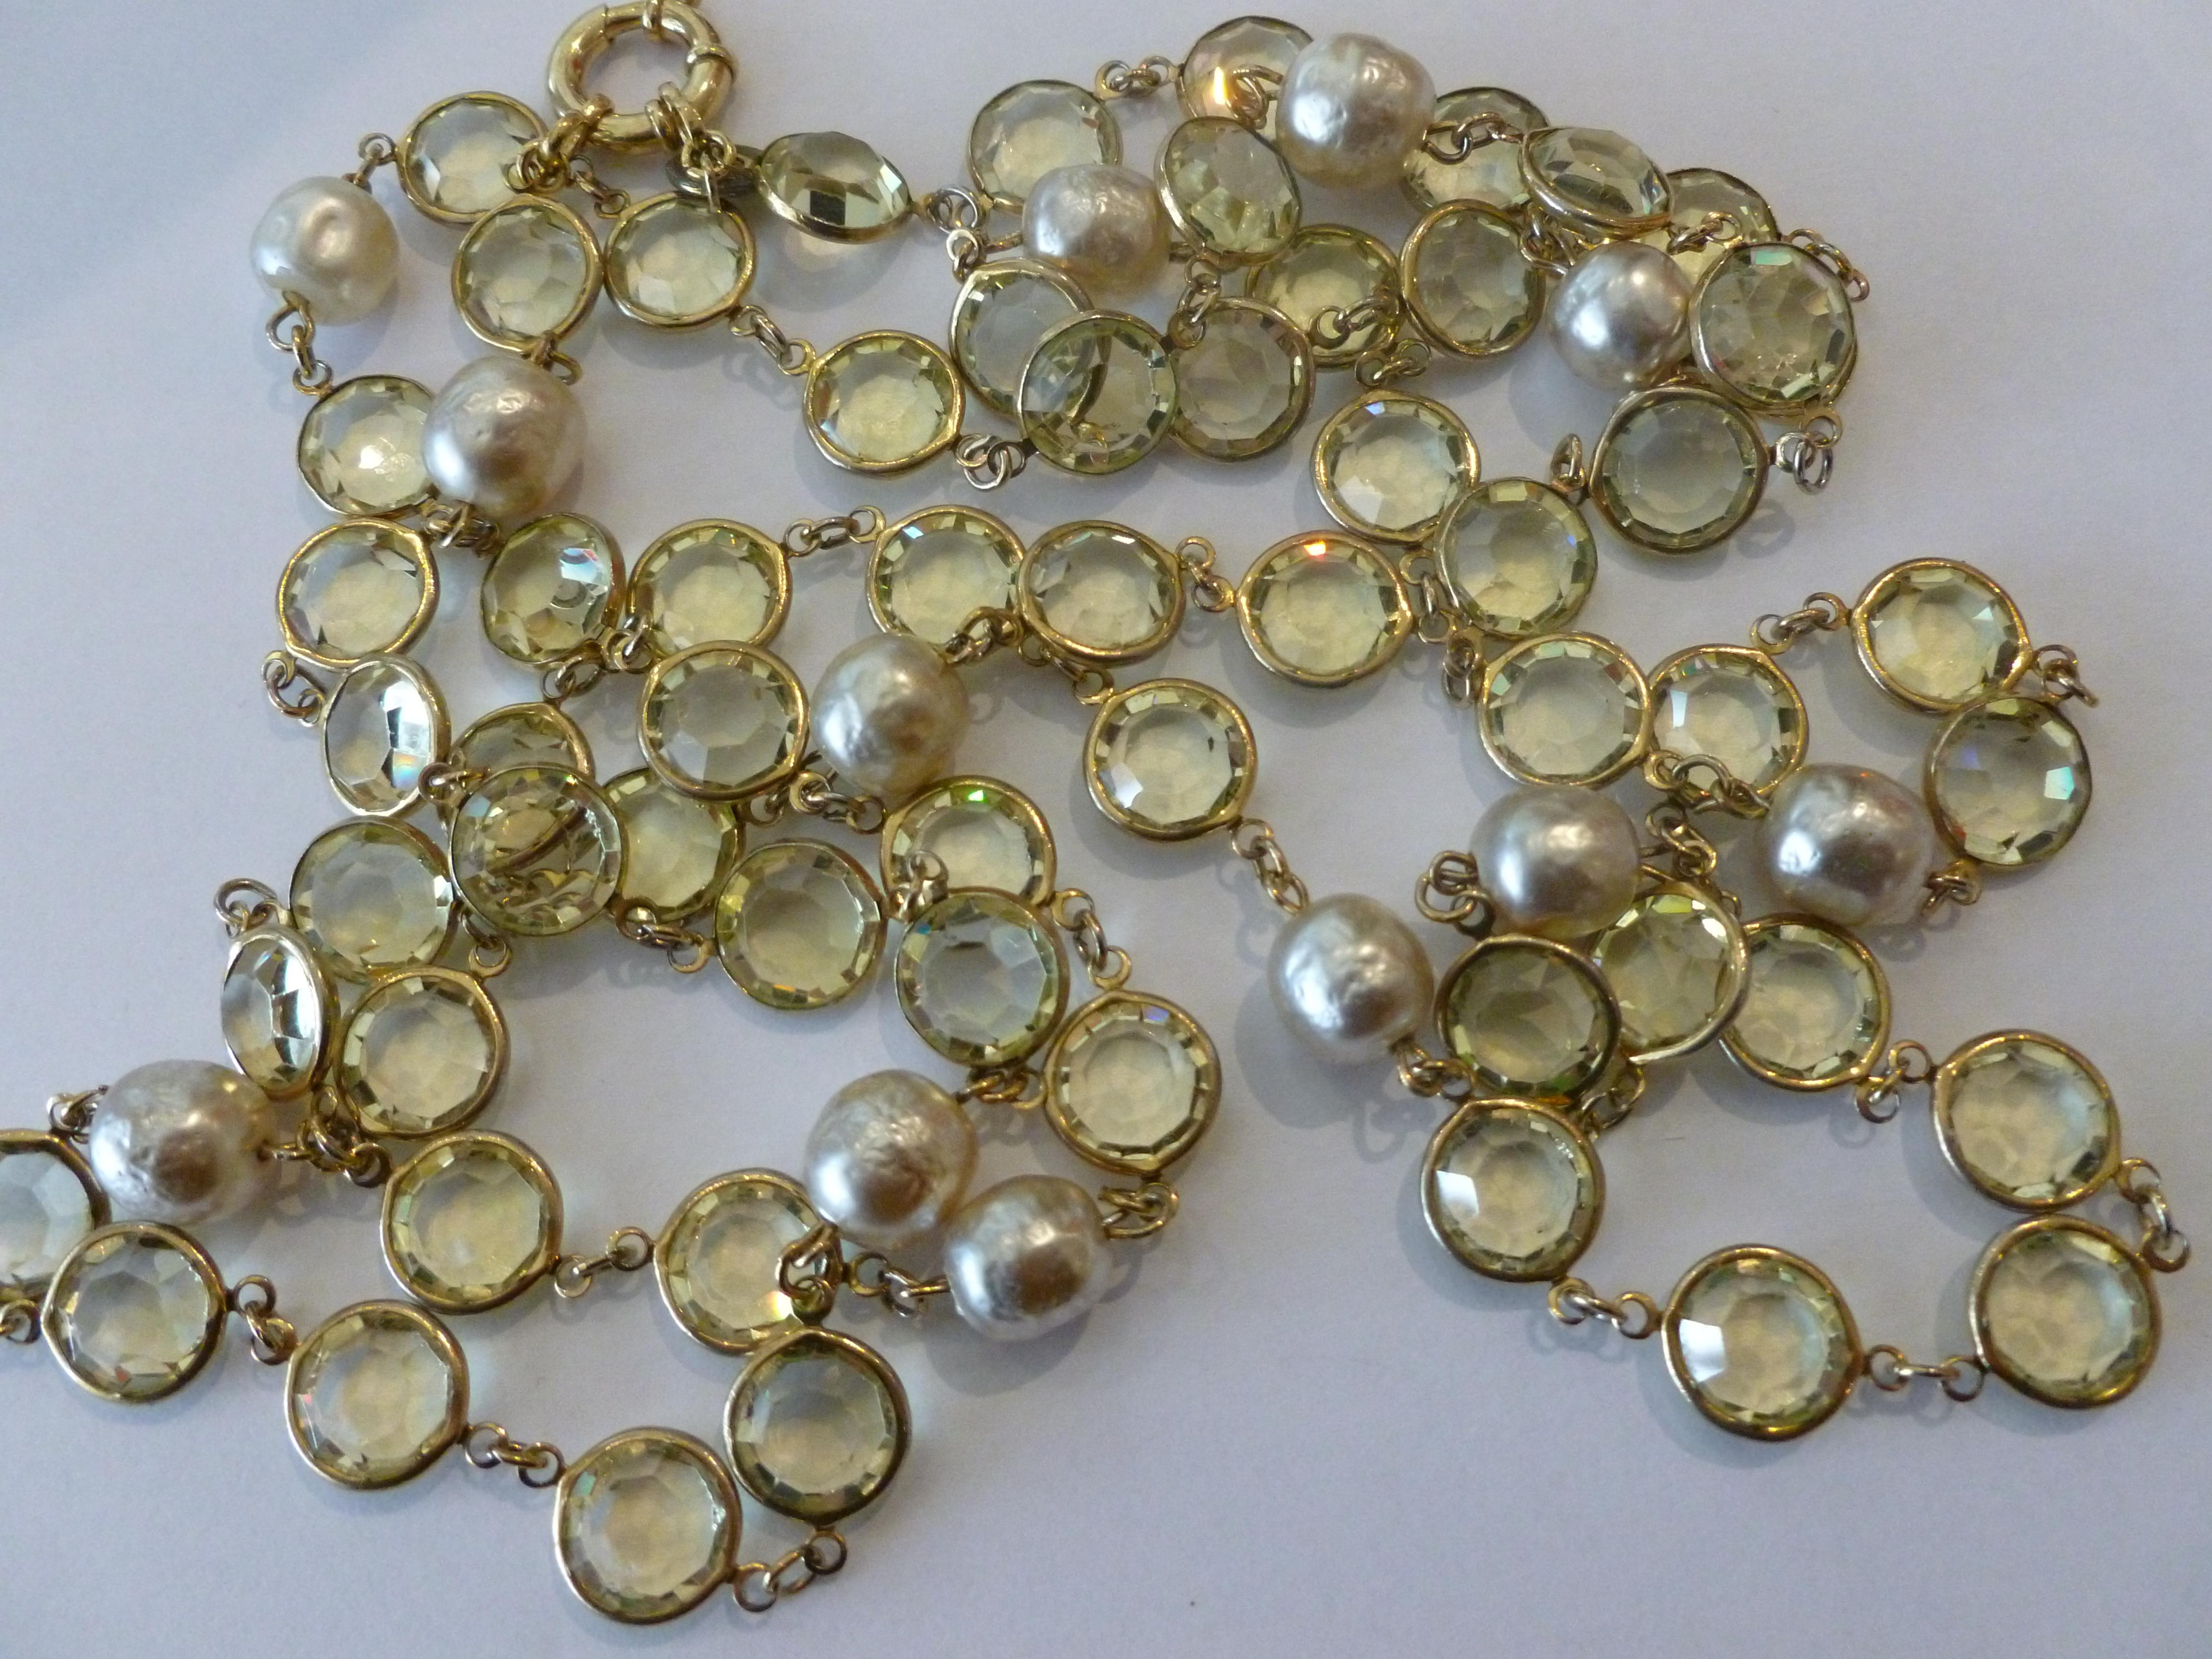 This stunning, bright and happy vintage Chanel sautoir long necklace is a gorgeous color of chartreuse beveled crystals with faux pearl interspersed. It can be wrapped twice or three times around your neck. The color is a light chartreuse green that